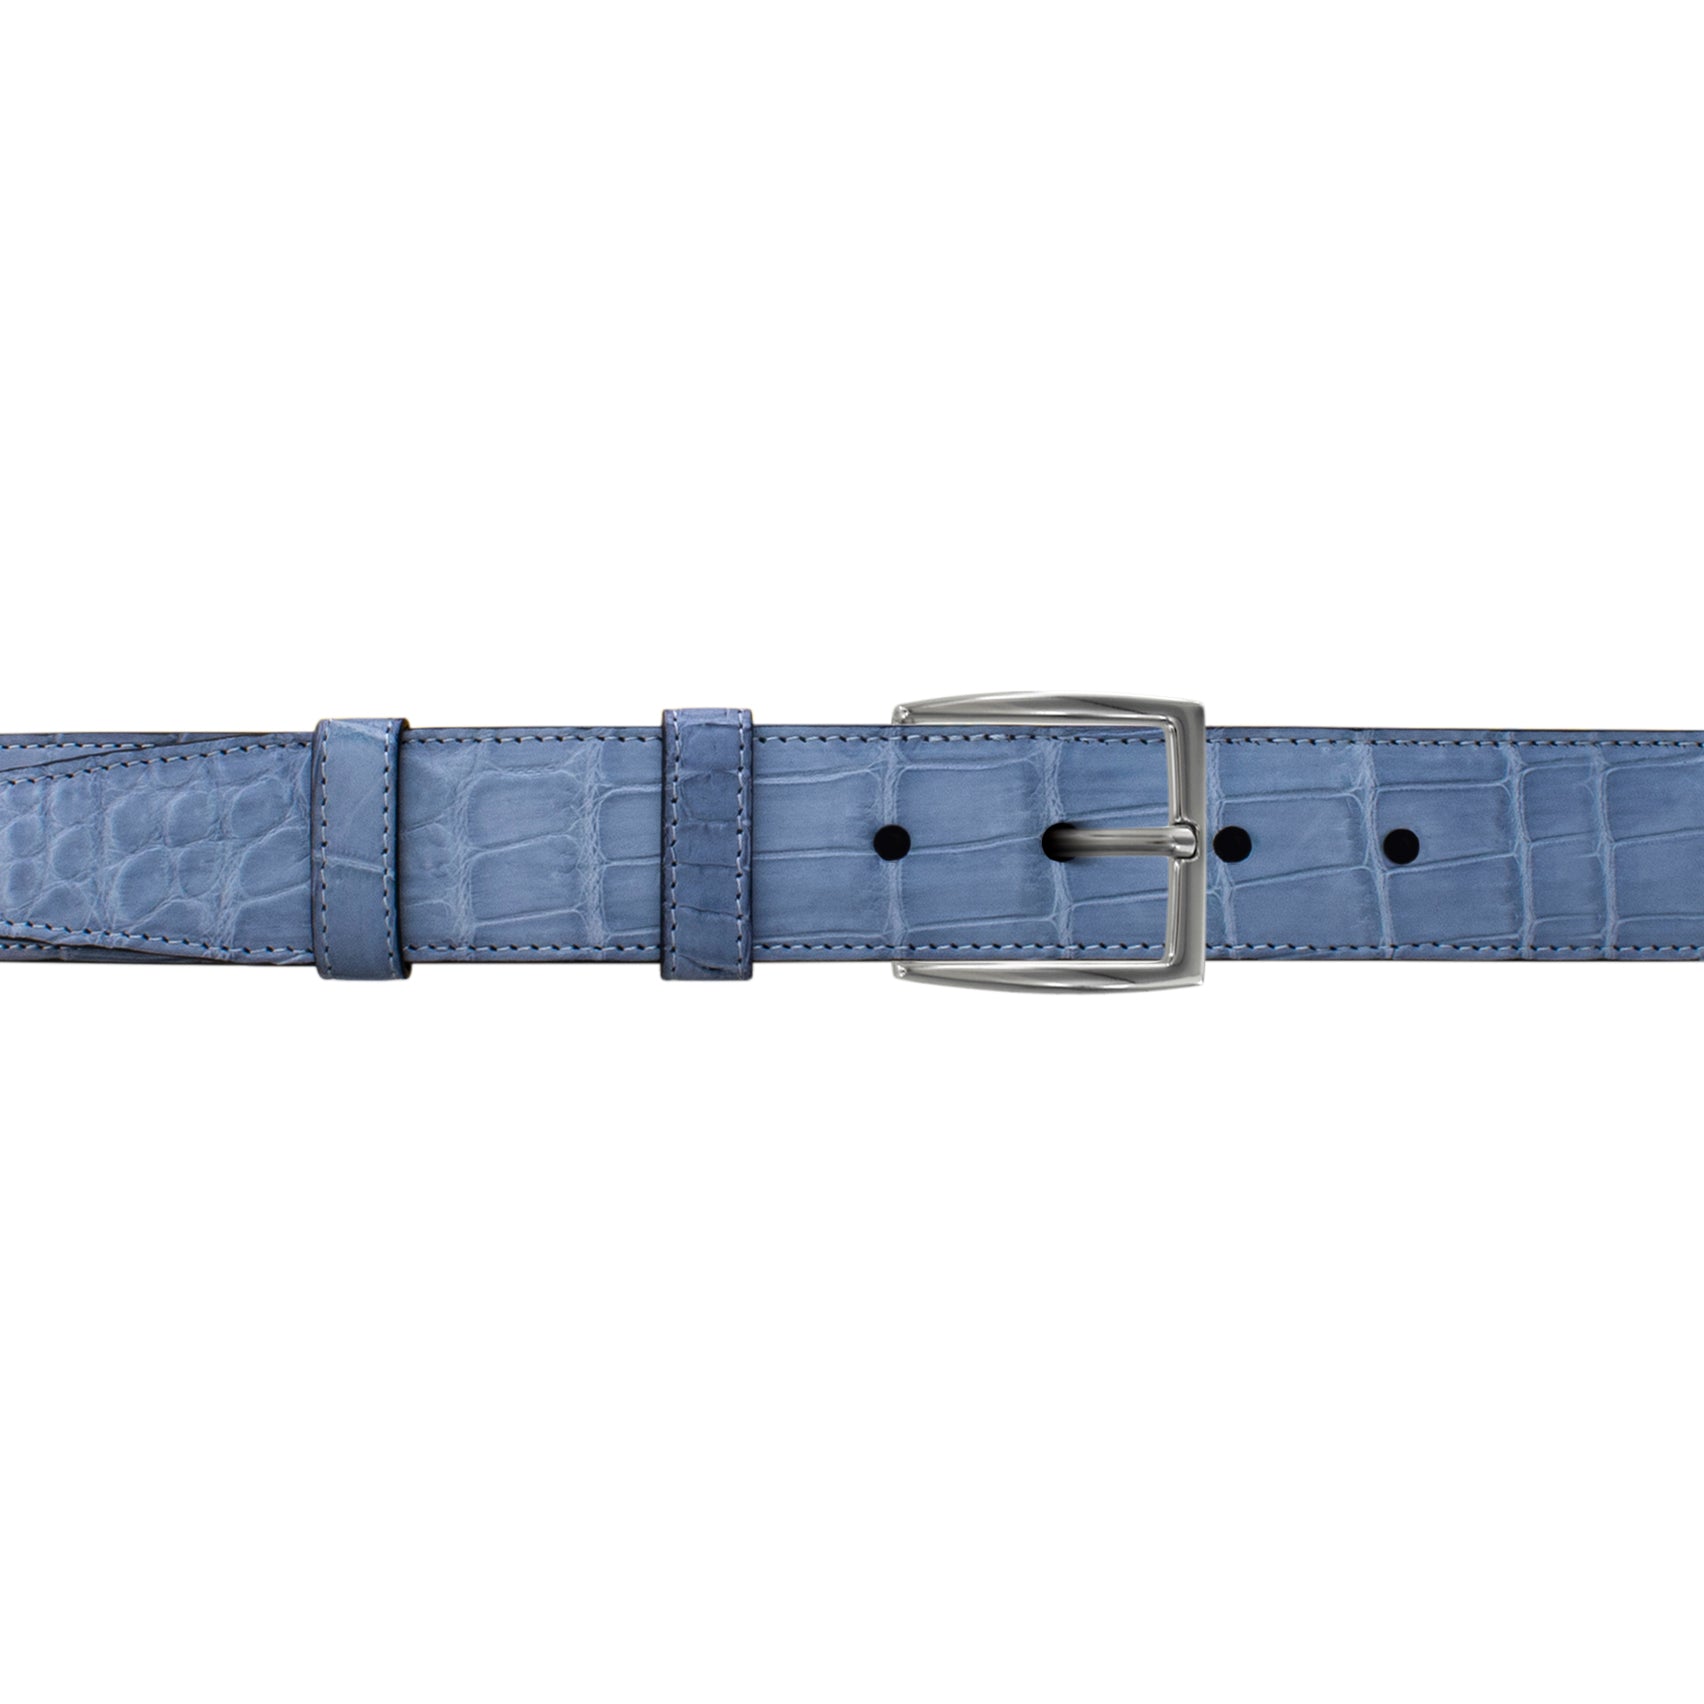 1 1/4" Arctic Classic Belt with Winston Dress Buckle in Polished Nickel